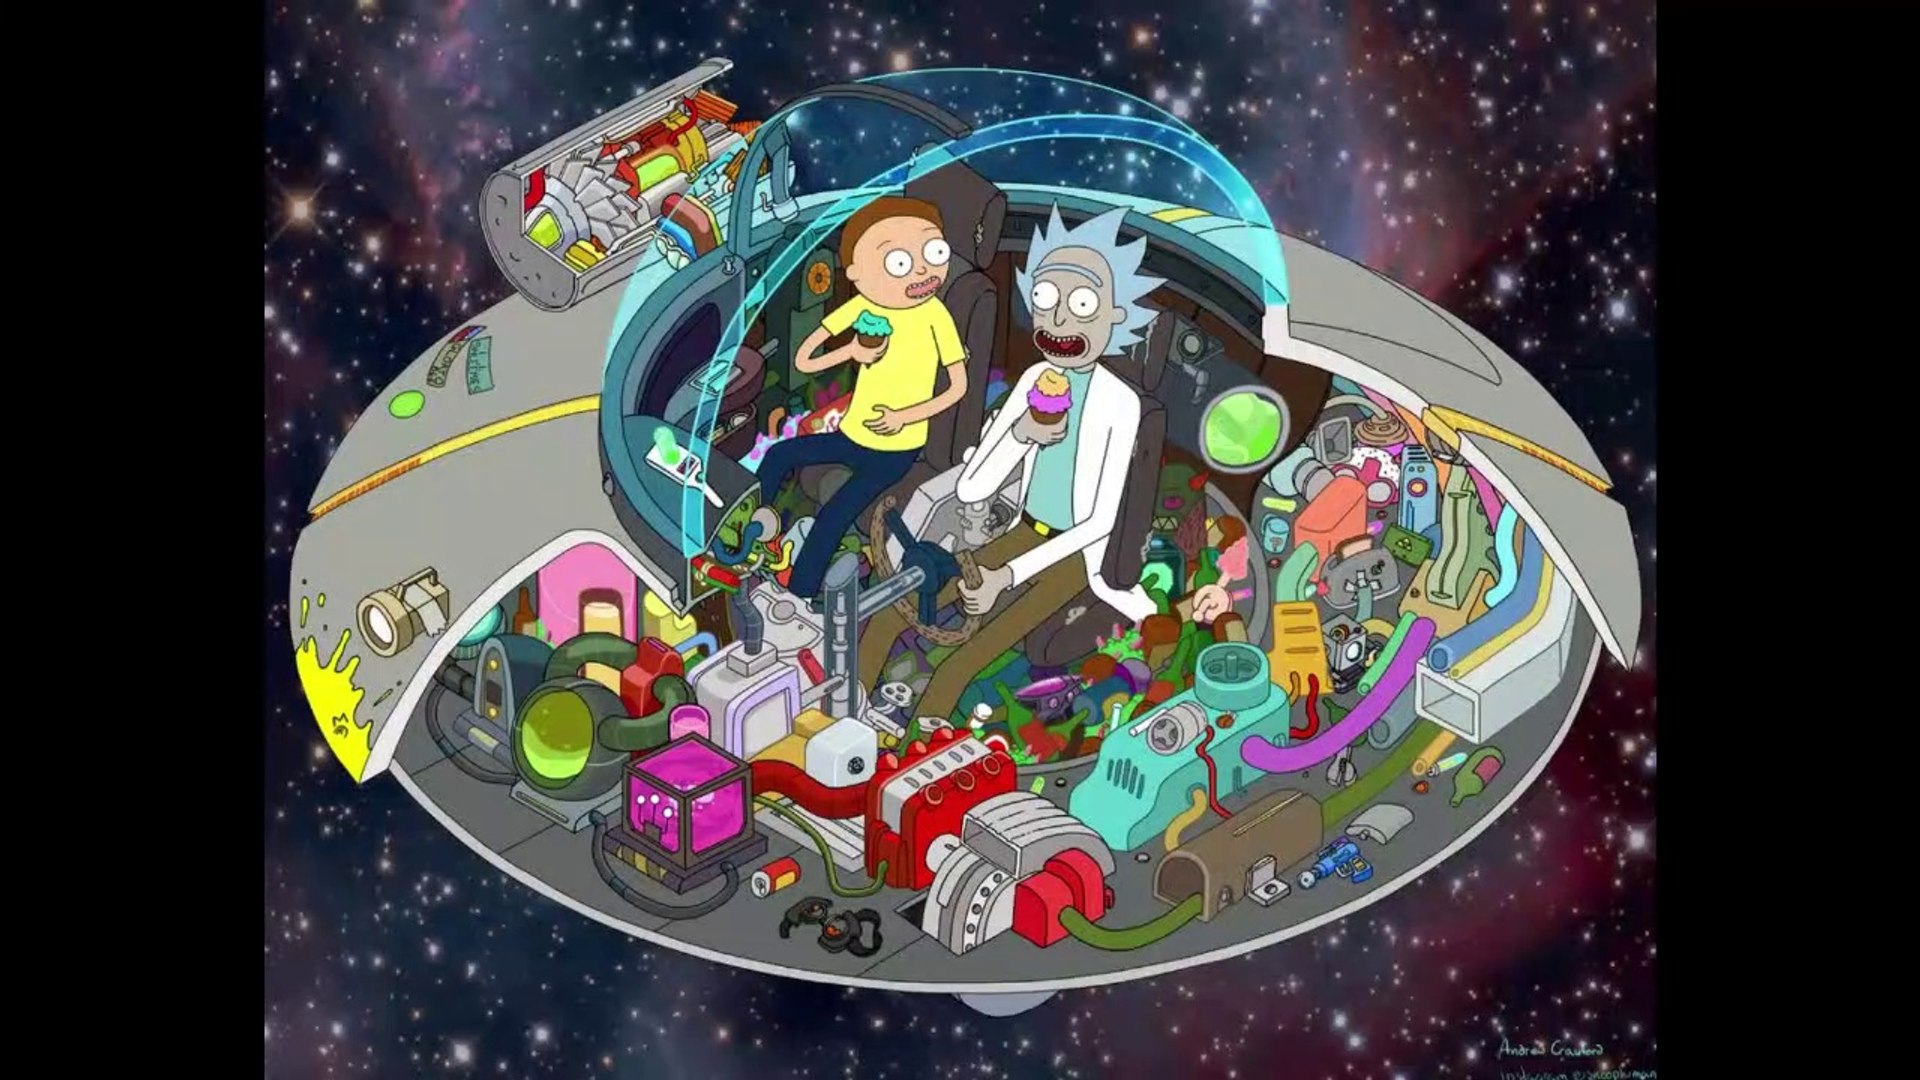 Top 10 Things you Missed in Rick and Morty Season 6 ep 1 - video Dailymotion